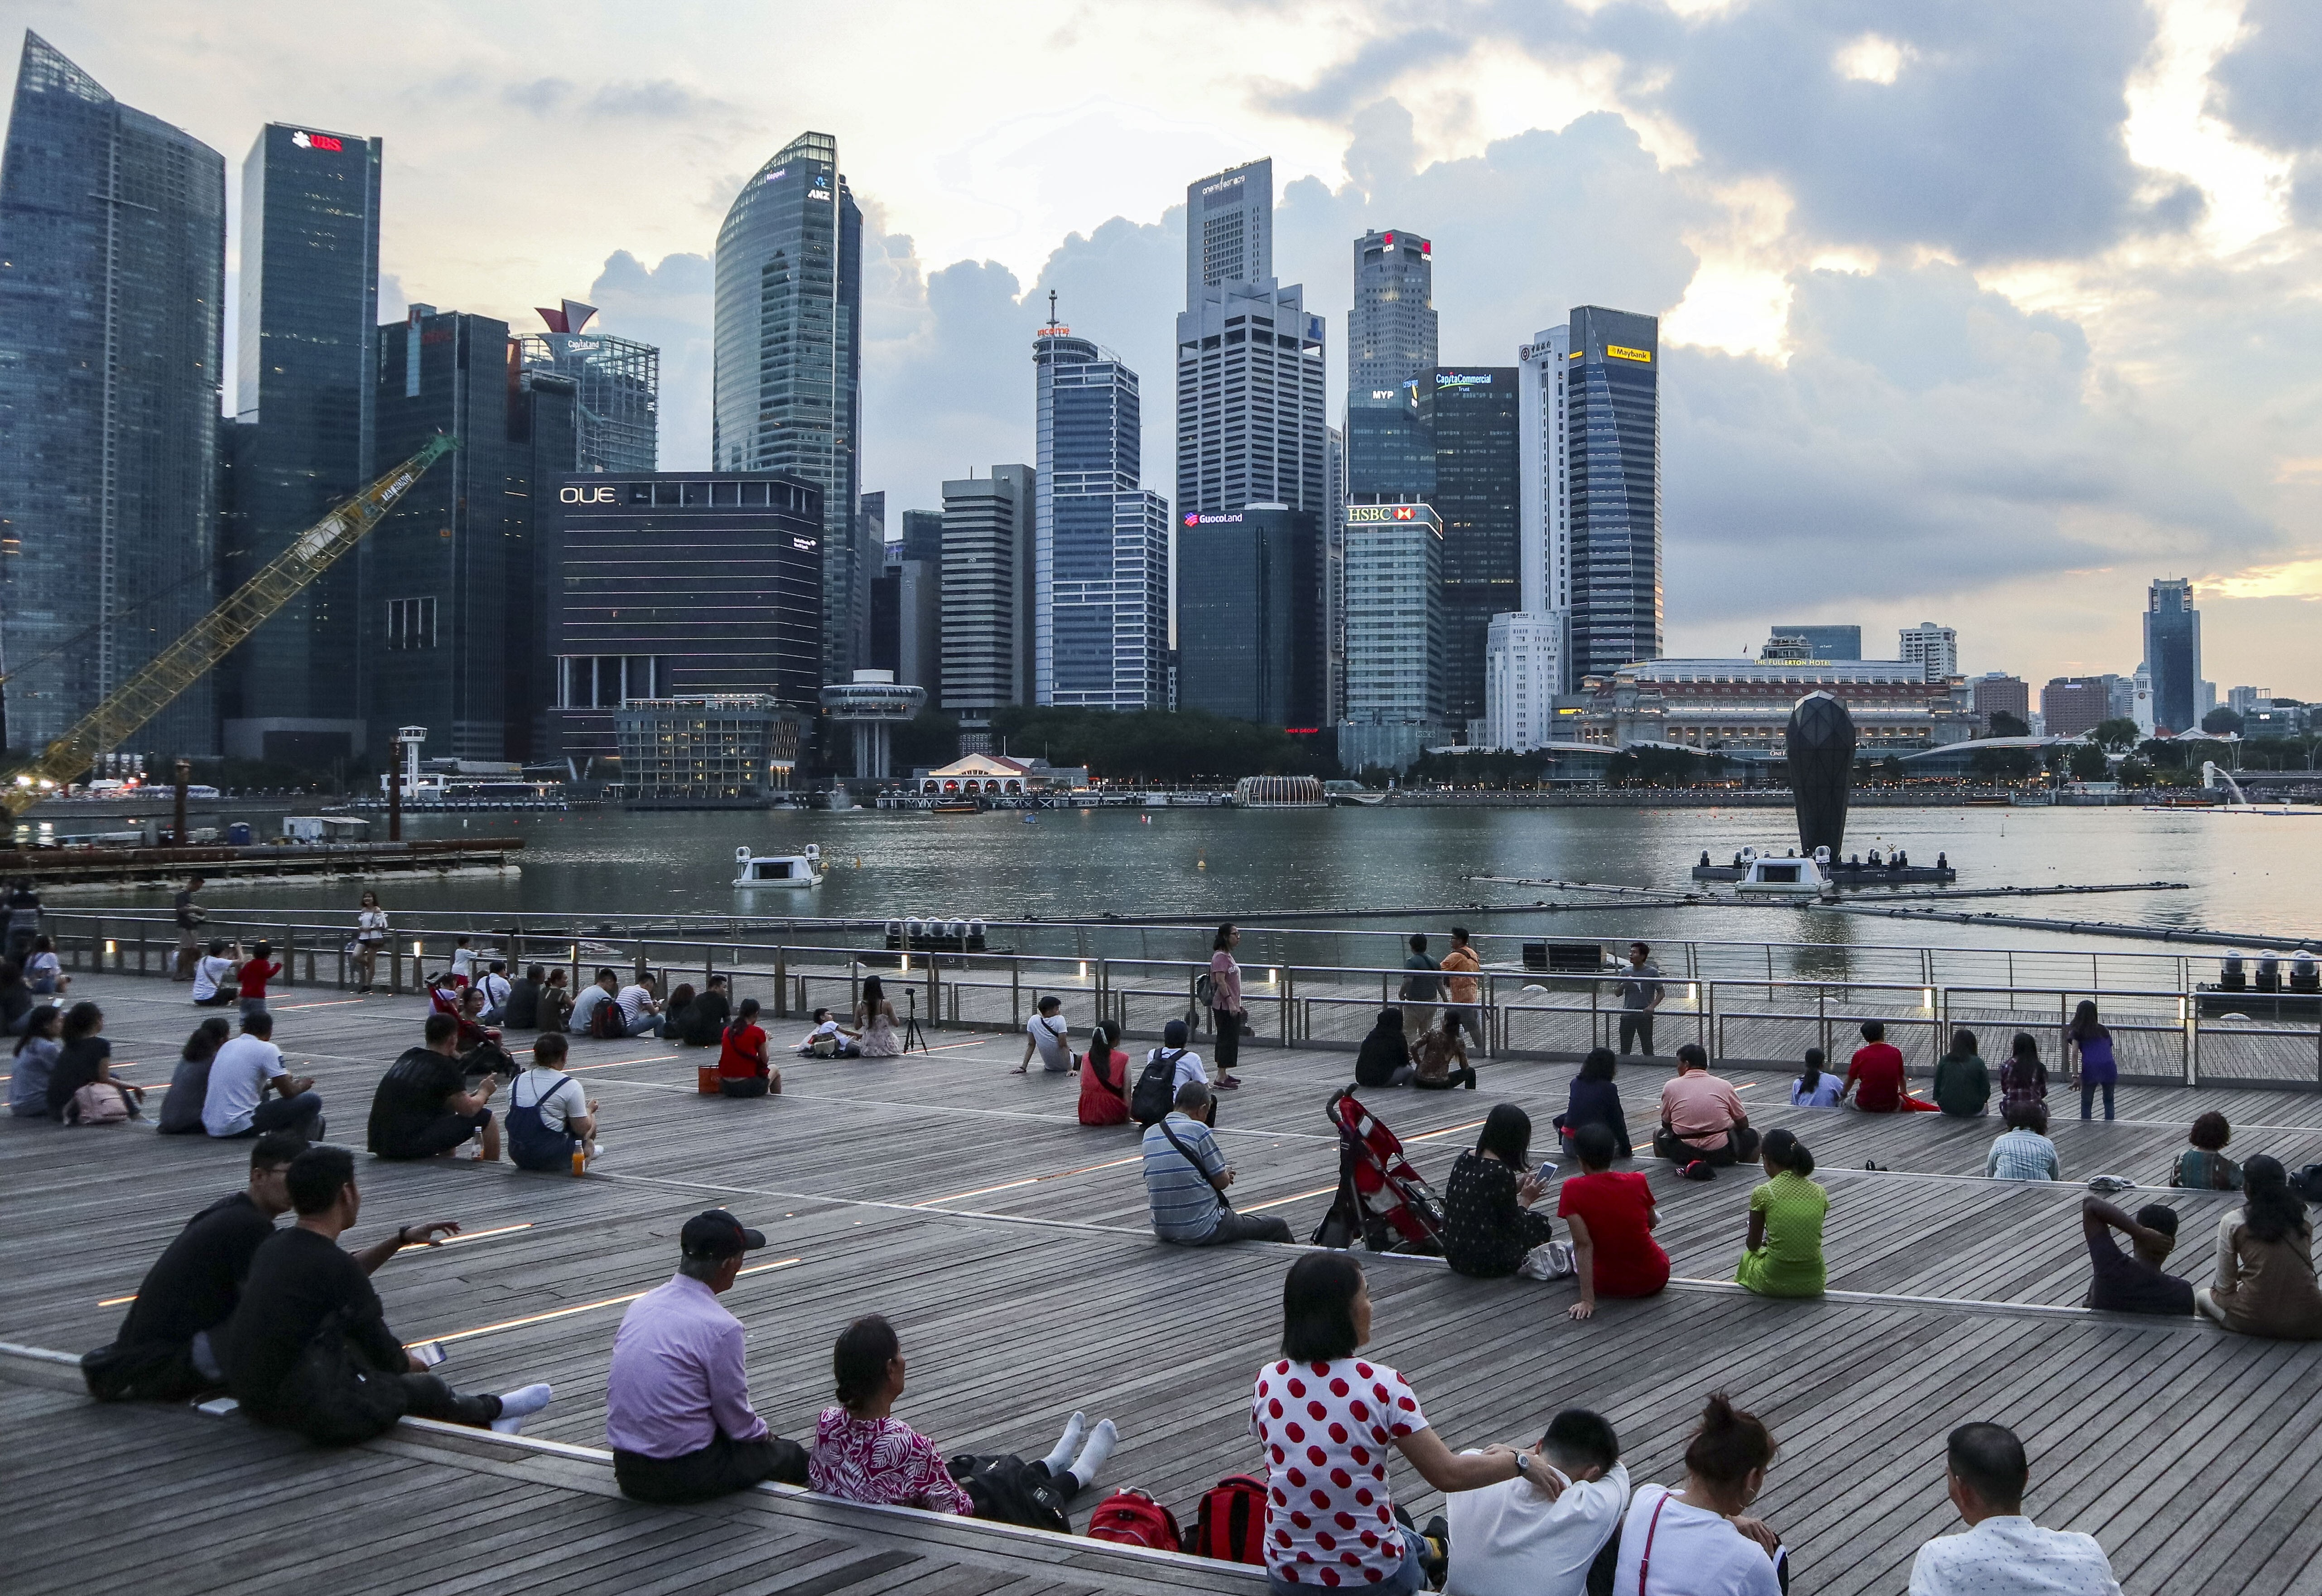 Exterior of the Marina Bay Sands shopping mall where tourists and locals are seen sitting with the Central Business District in in Singapore is seen in the background. Photo: Roy Issa